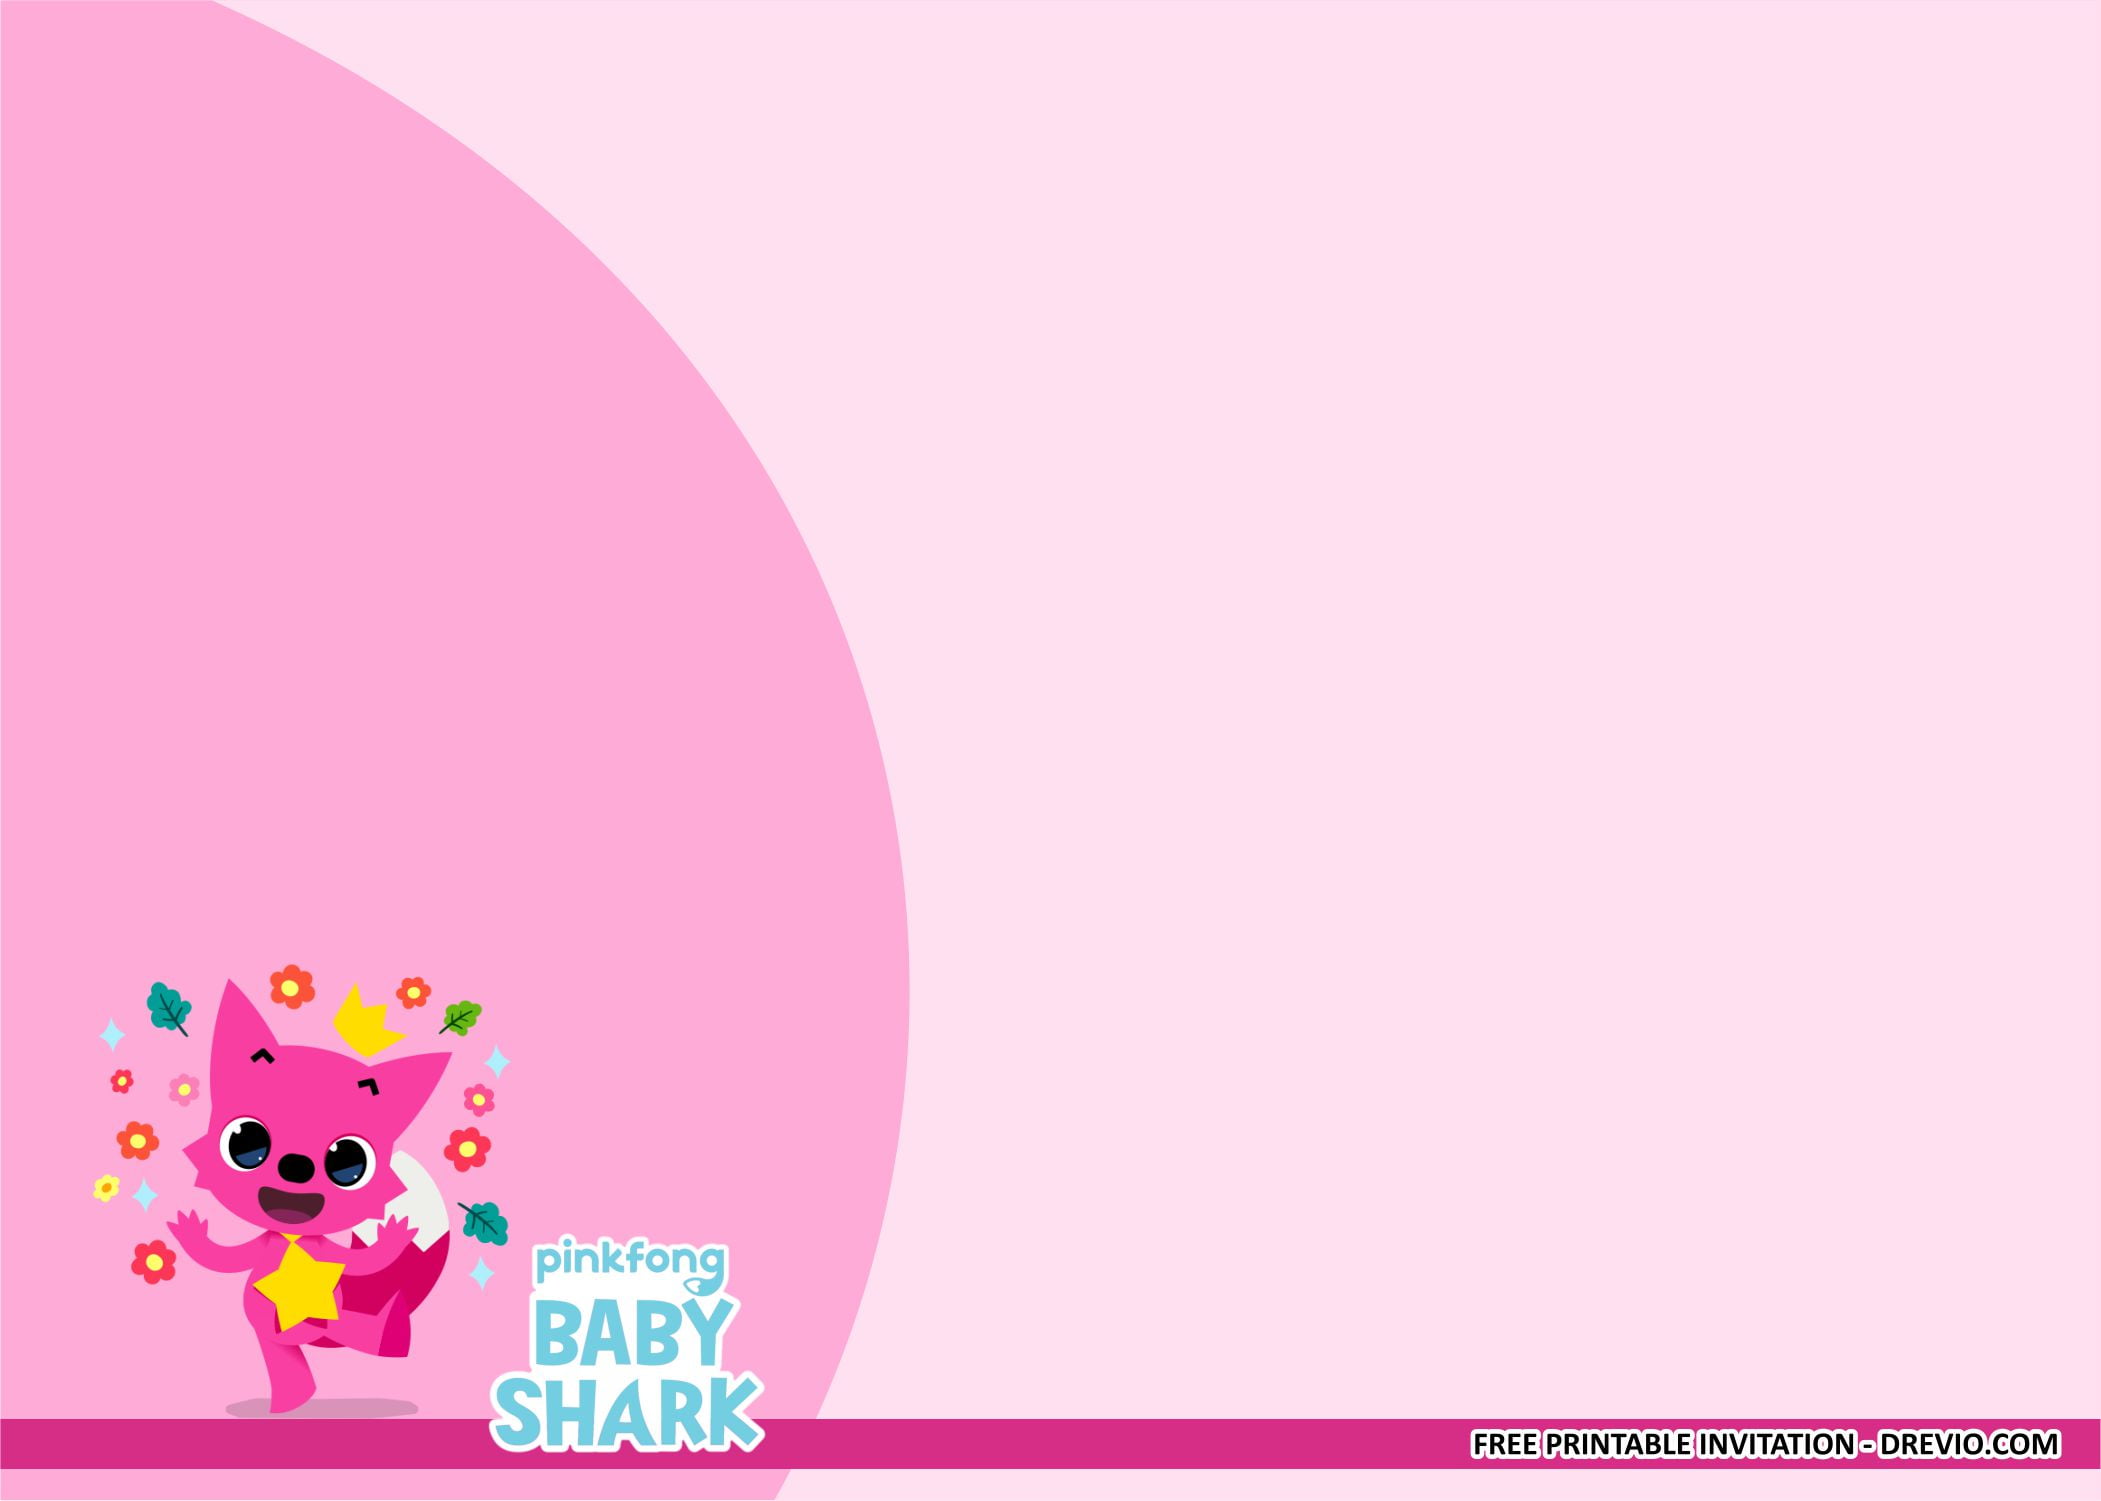 Free Printable Pinkfong Baby Shark Birthday Party Kits Template